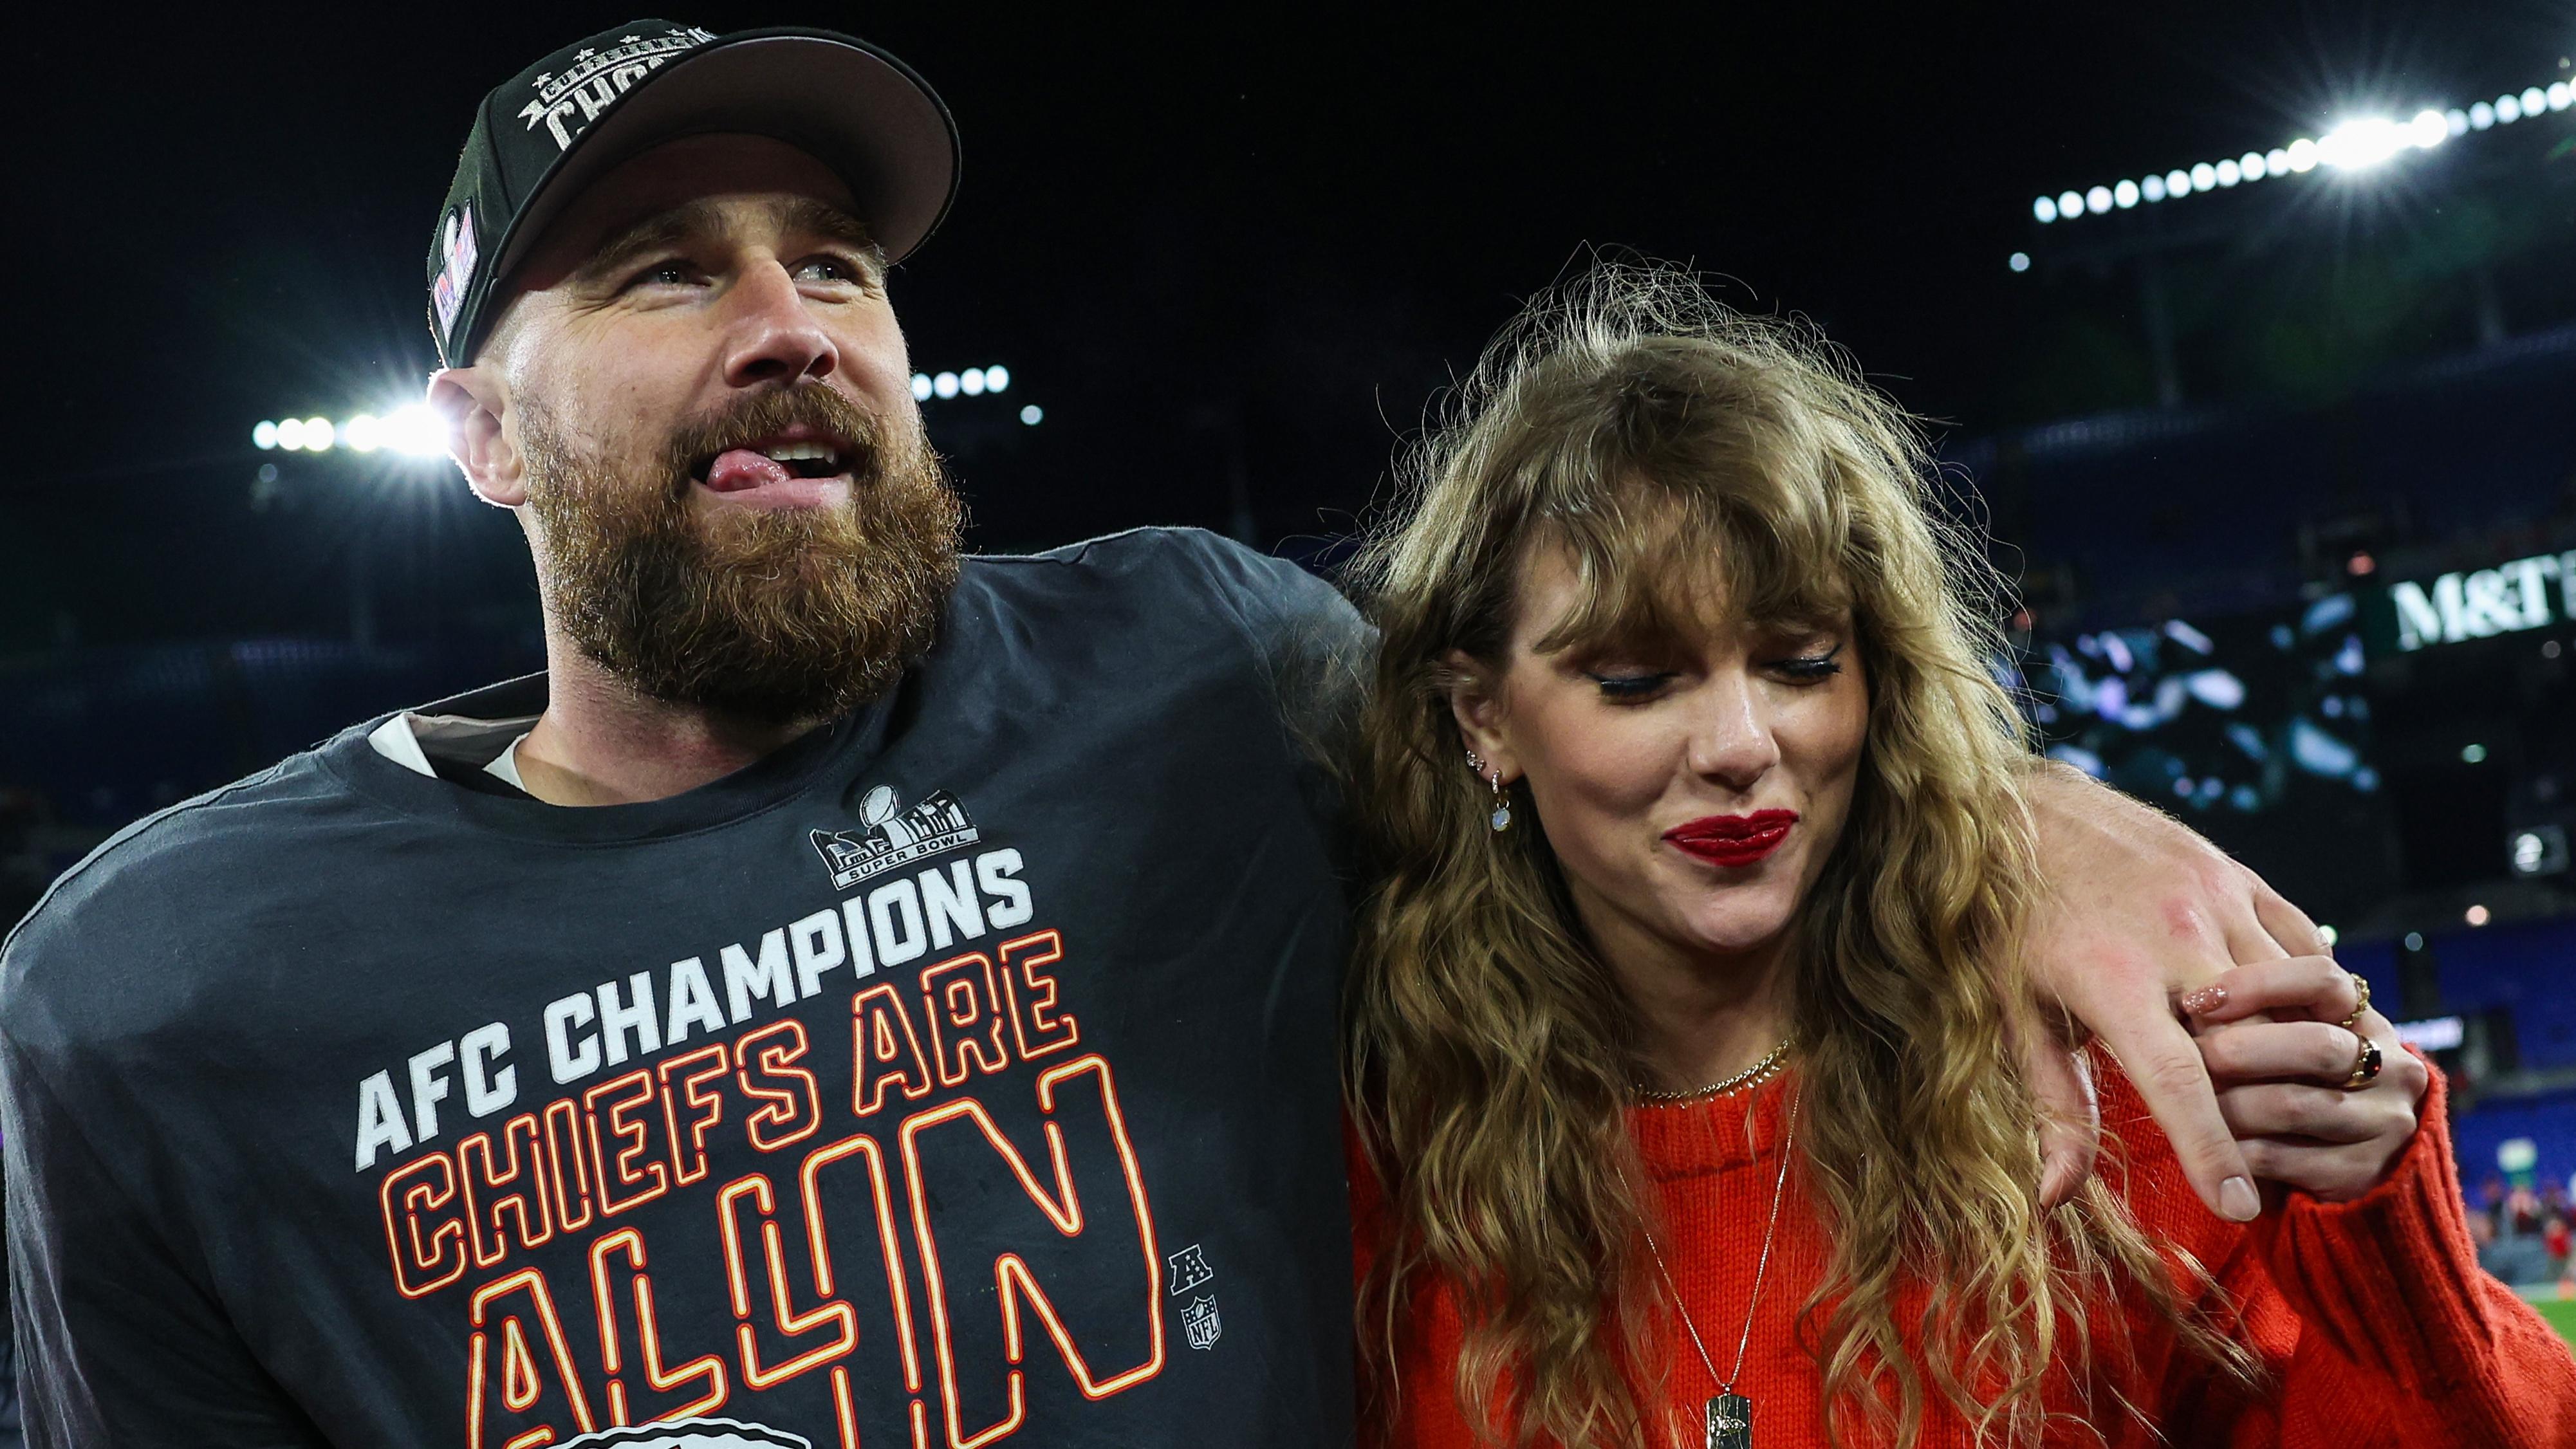 Chiefs chose not to play Taylor Swift music in Arrowhead Stadium to be 'respectful' of Travis Kelce